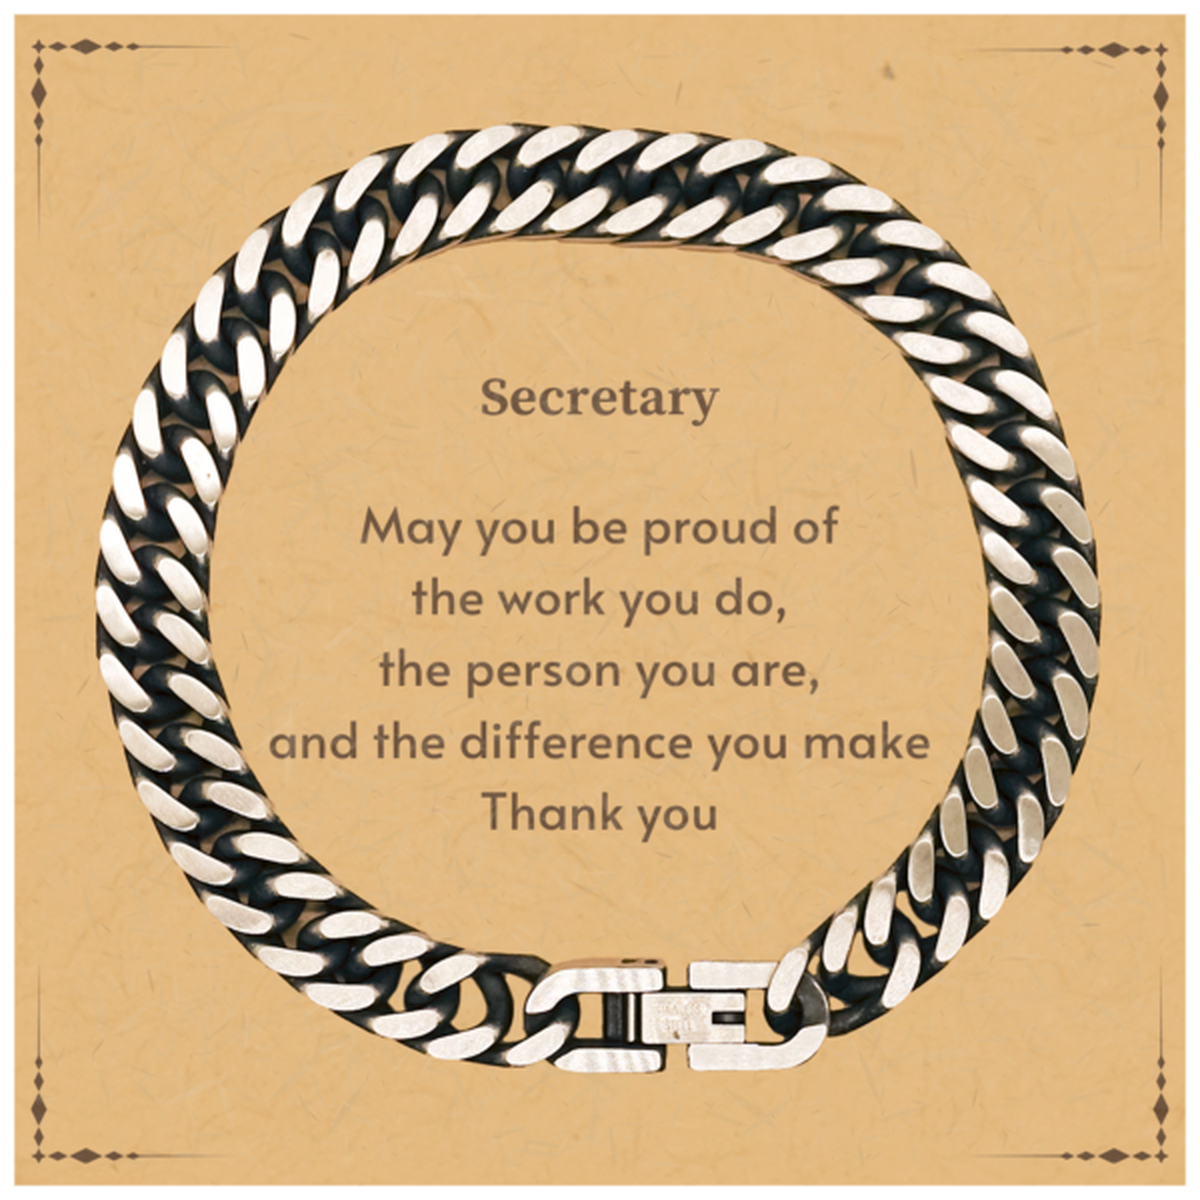 Heartwarming Cuban Link Chain Bracelet Retirement Coworkers Gifts for Secretary, Secretary May You be proud of the work you do, the person you are Gifts for Boss Men Women Friends